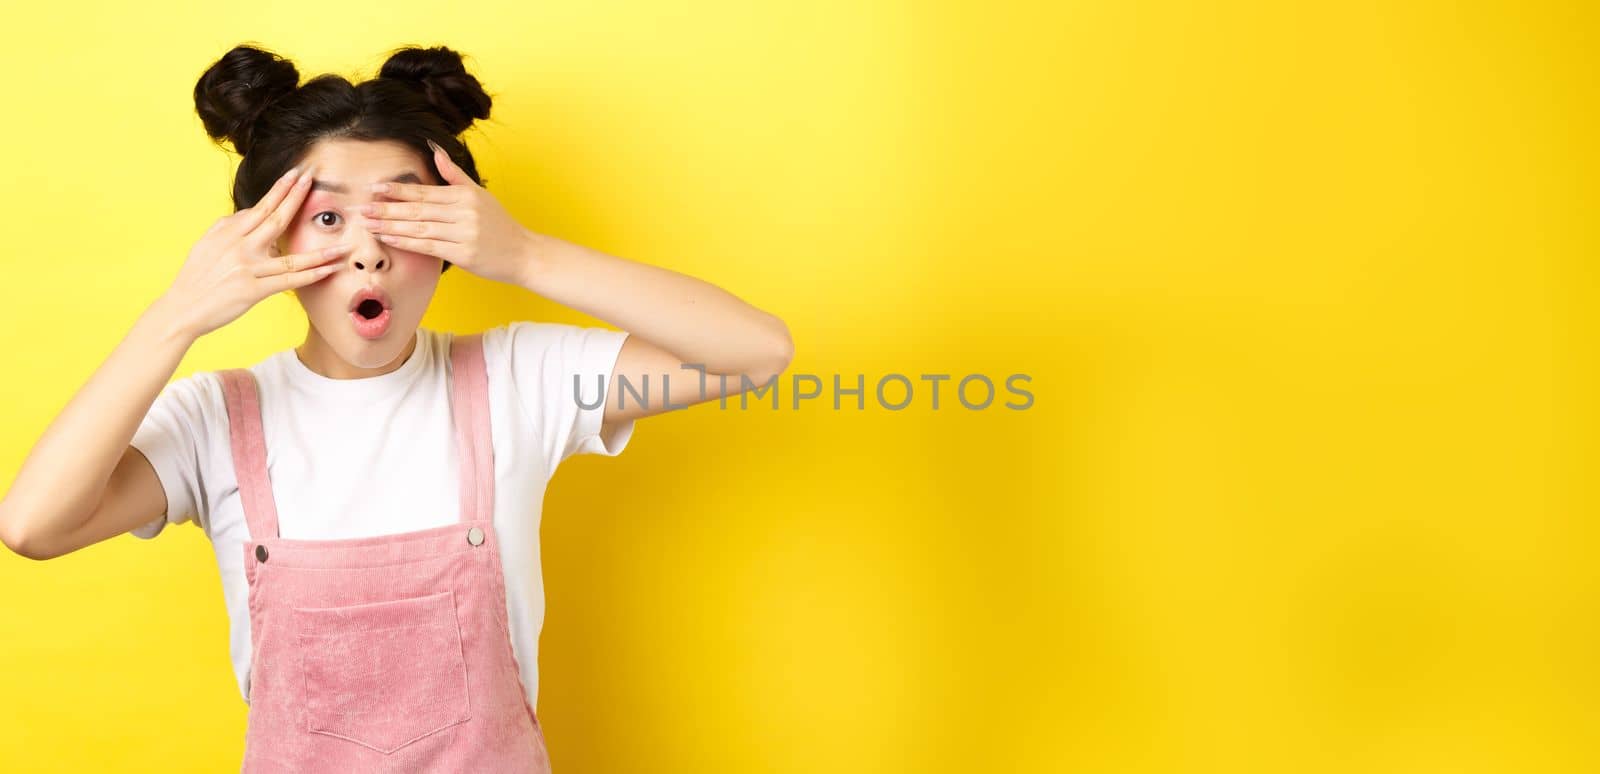 Excited asian teen girl covering eyes with hands and peeking through fingers, gasping amazed at camera, standing in summer clothes on yellow background.